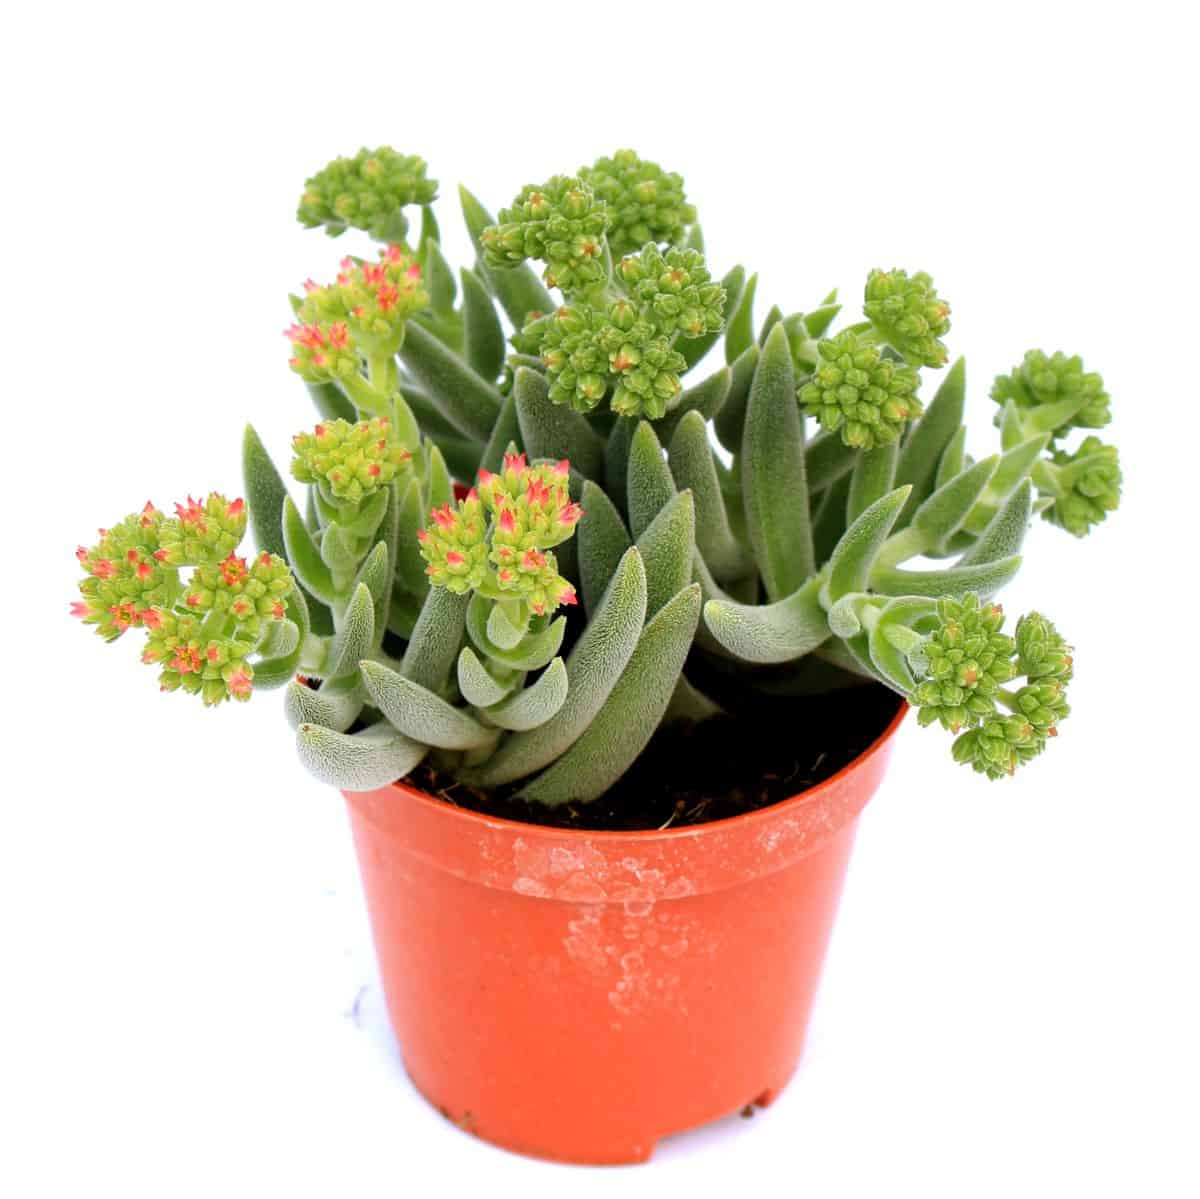 Blooming Crassula Mesembryanthemoides in a red pot.